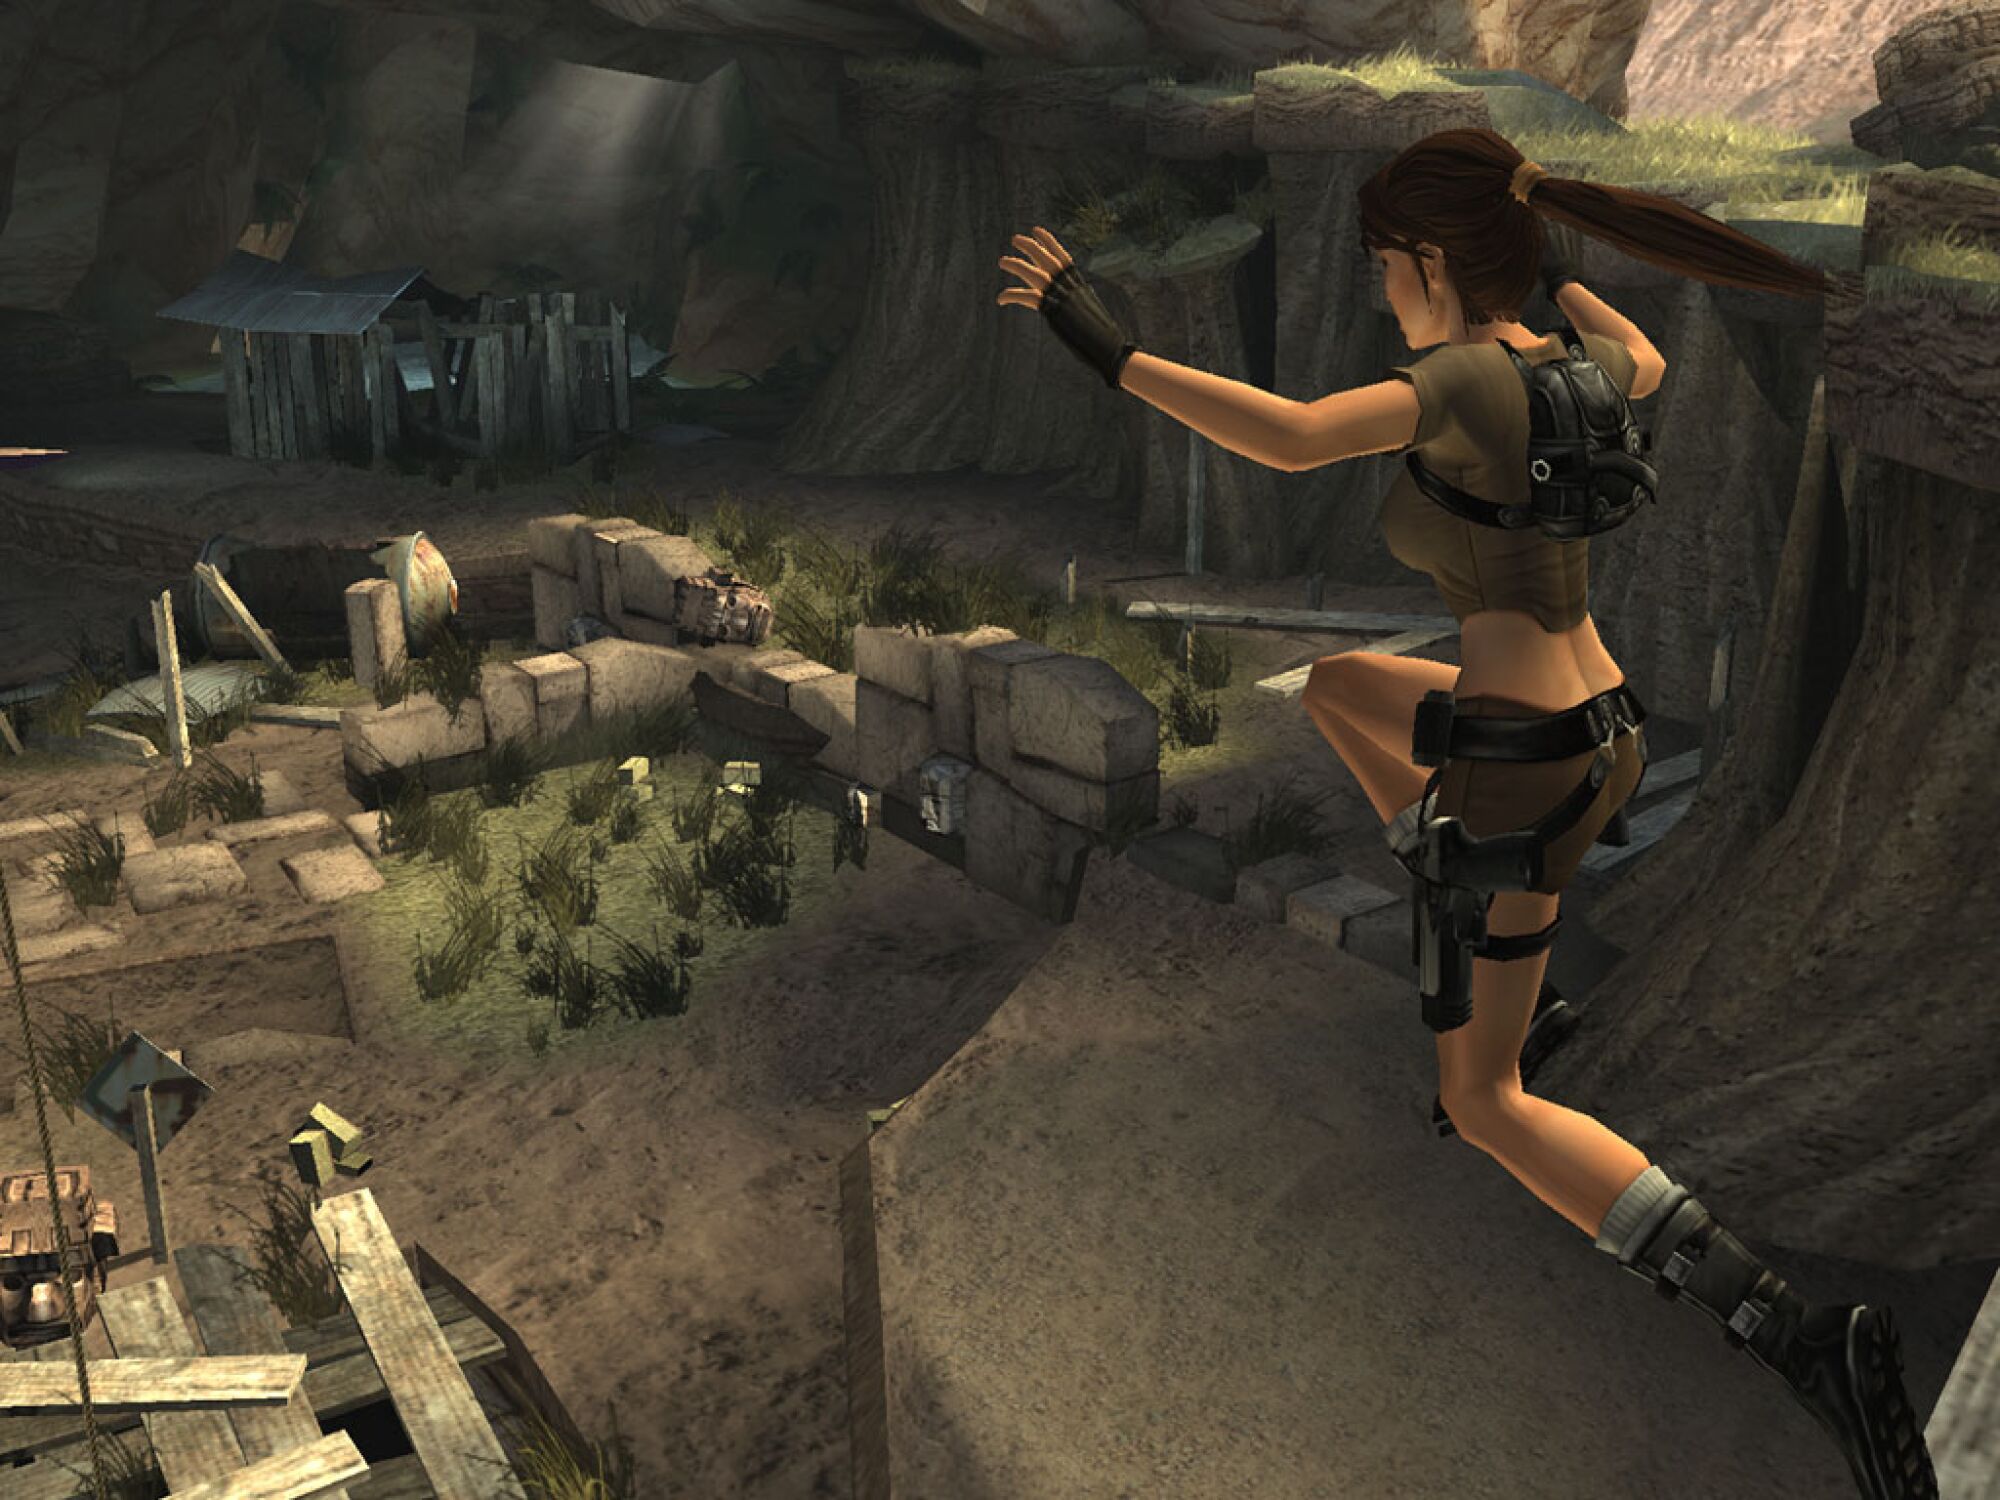 A screenshot shows a computer-generated woman in mid-jump in a cavern-like setting